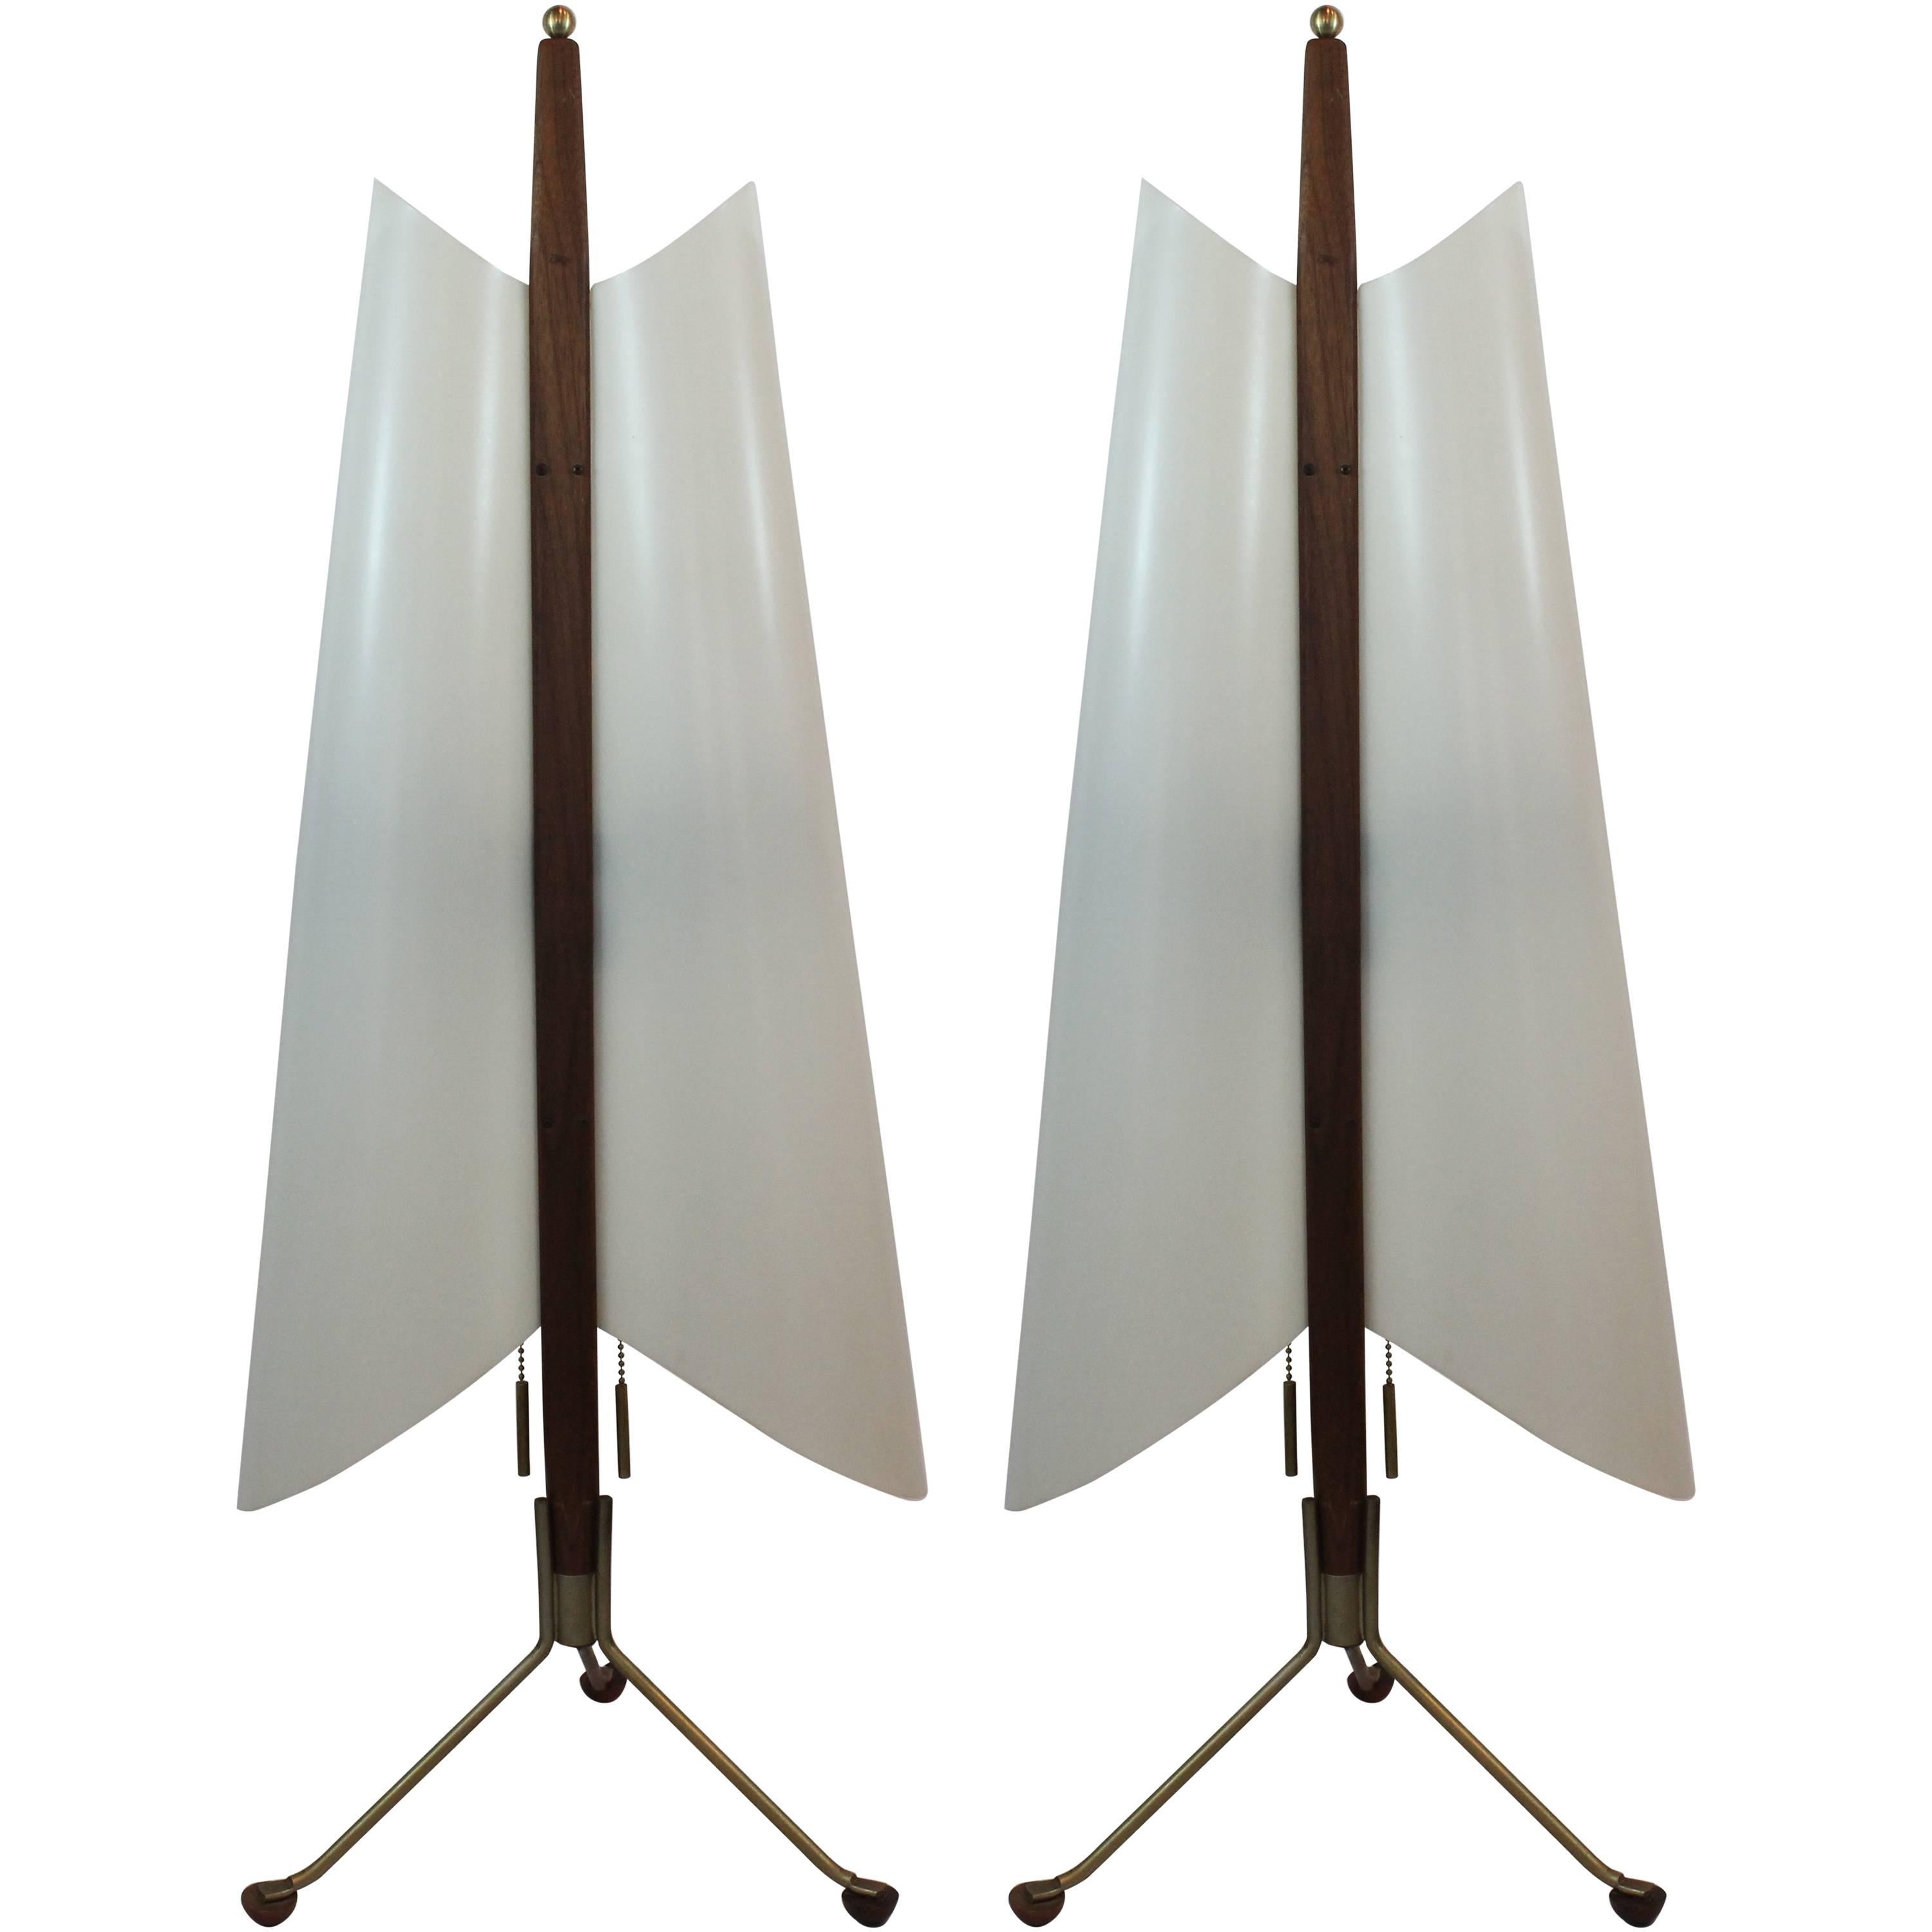 Pair of Modernist Angular Space Age Sculptural Lamps For Sale